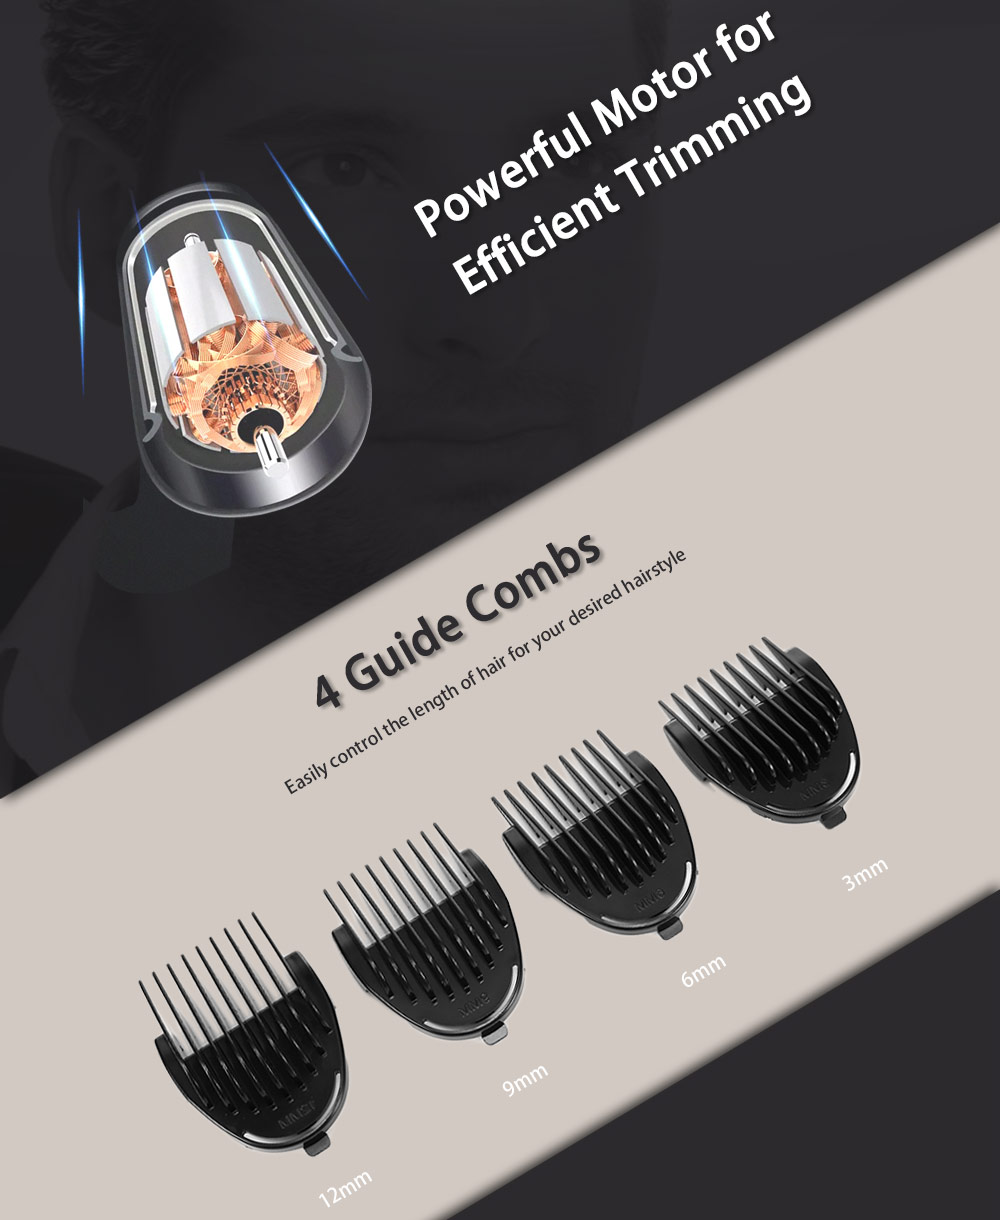 KM - 1605 Powerful Electric Hair Clipper Trimmer Styling Haircut